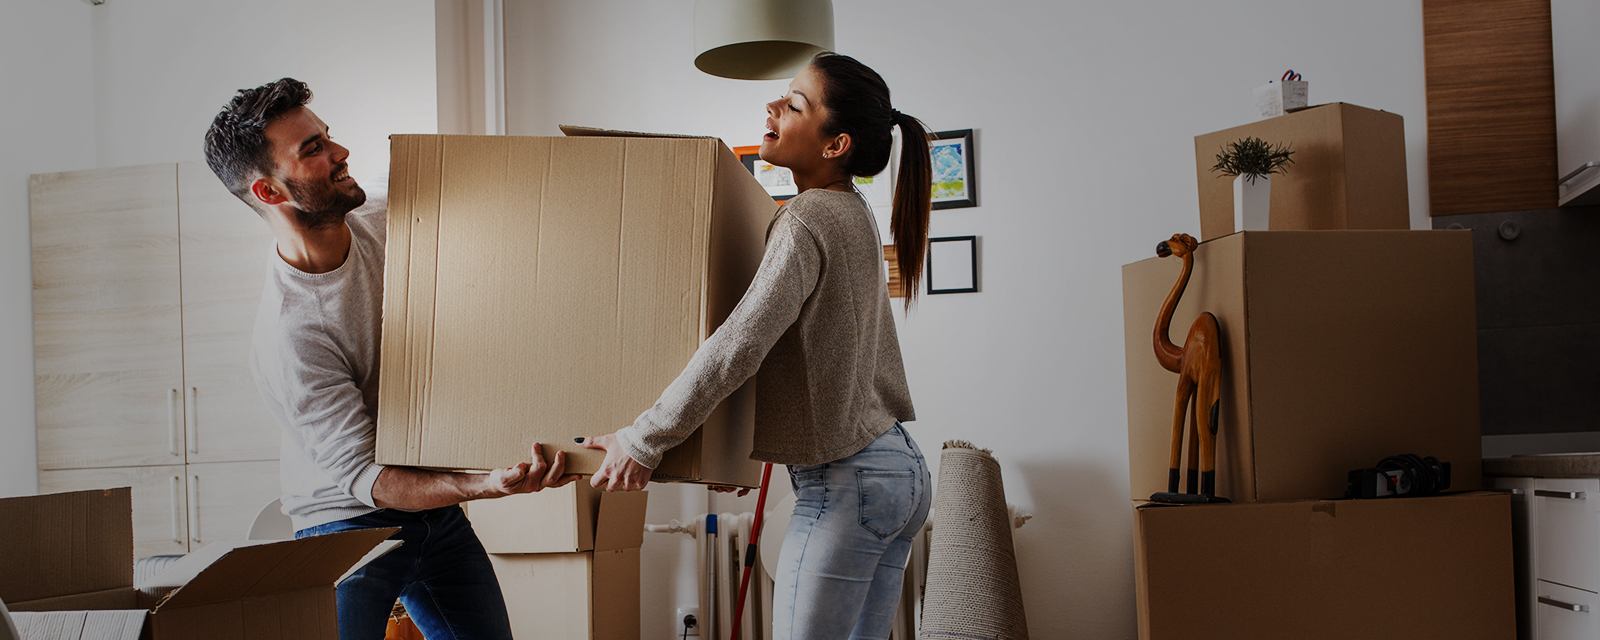 Young man and young woman carrying a box as they move into their new home or apartment